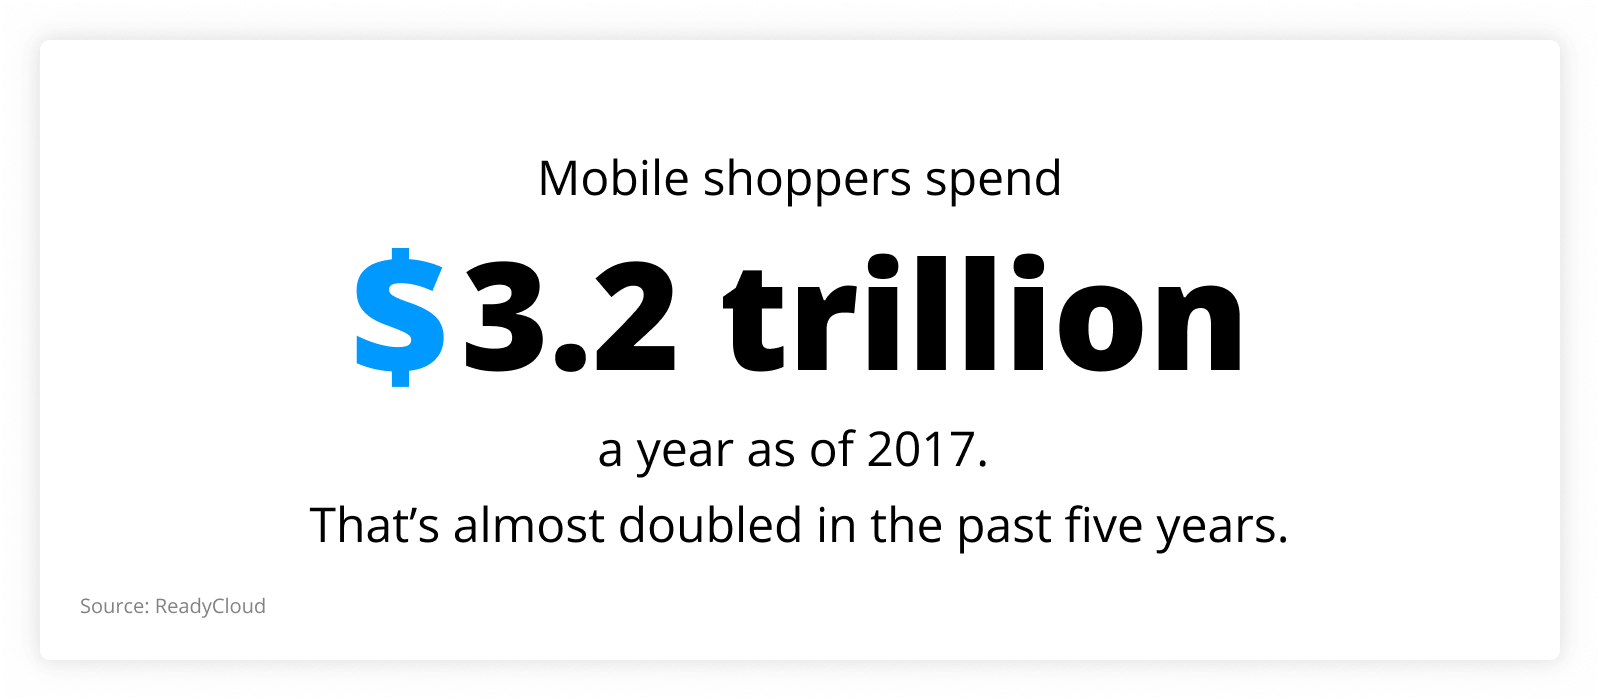 graph showing that Mobile shoppers spend $3.2 trillion a year as of 2017.